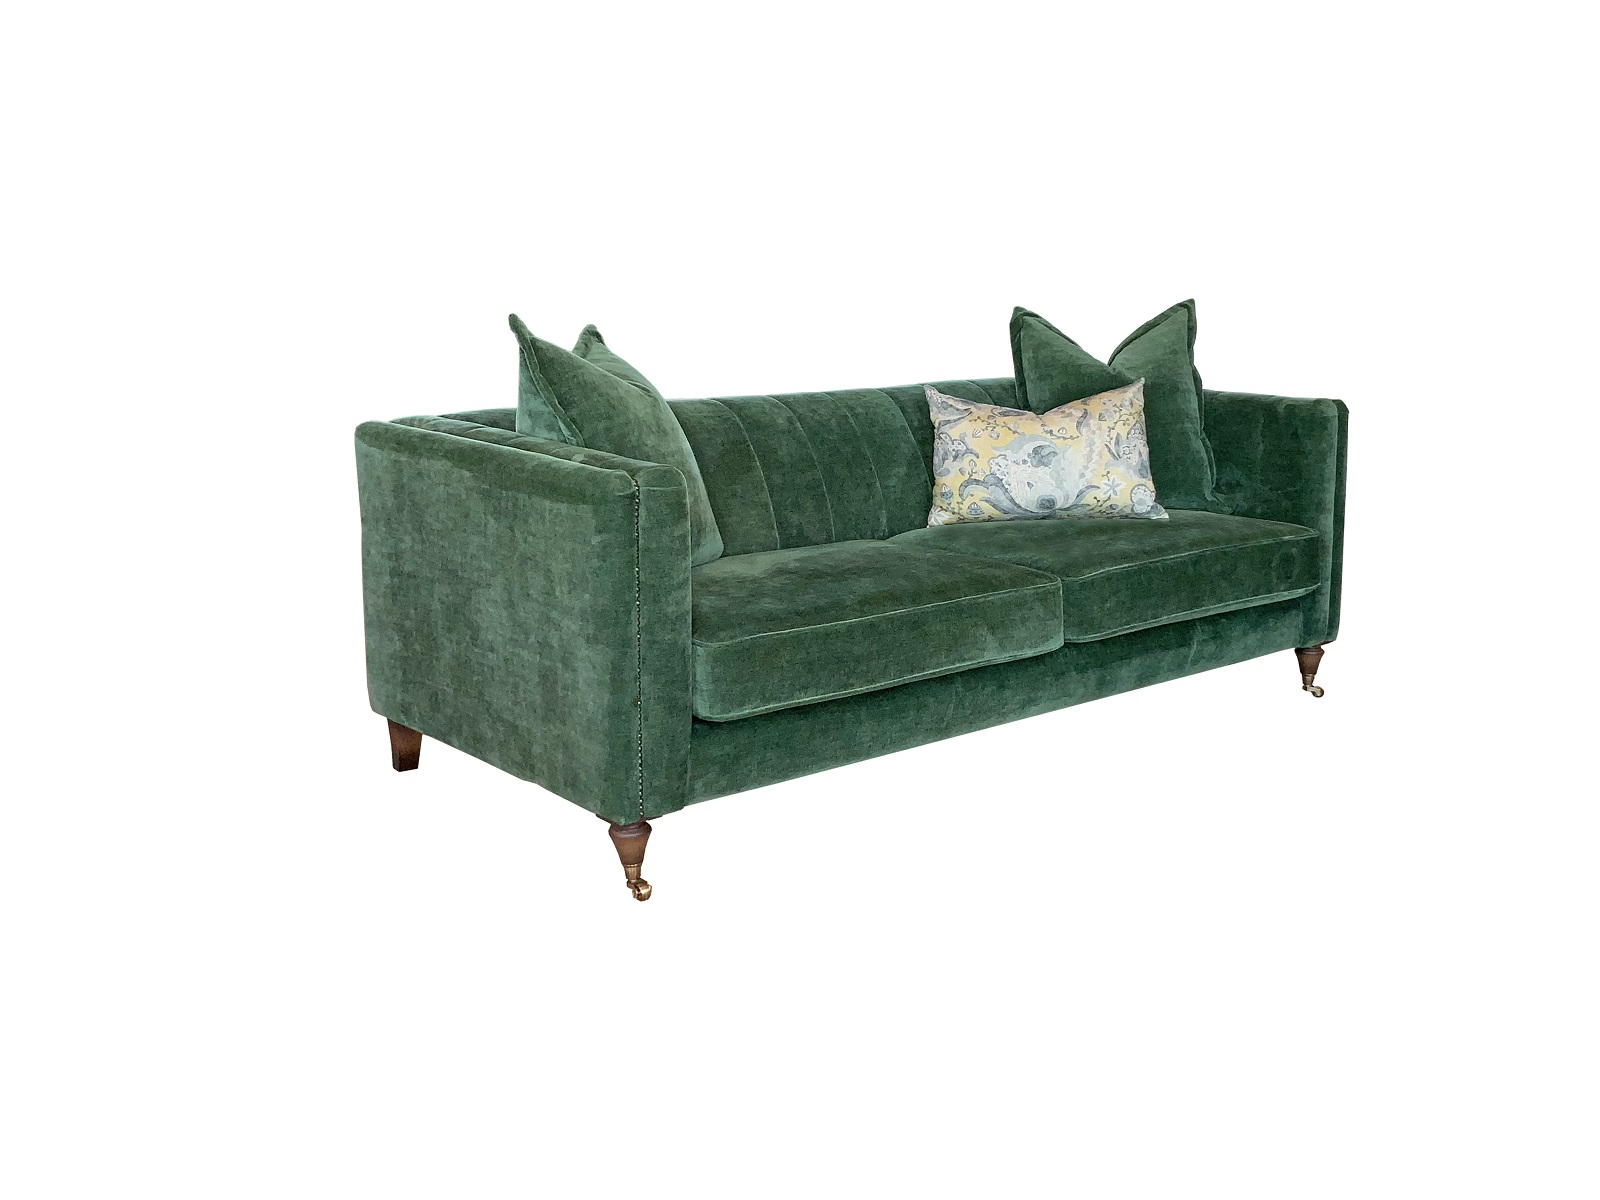 Foxley 4 Seater Sofa